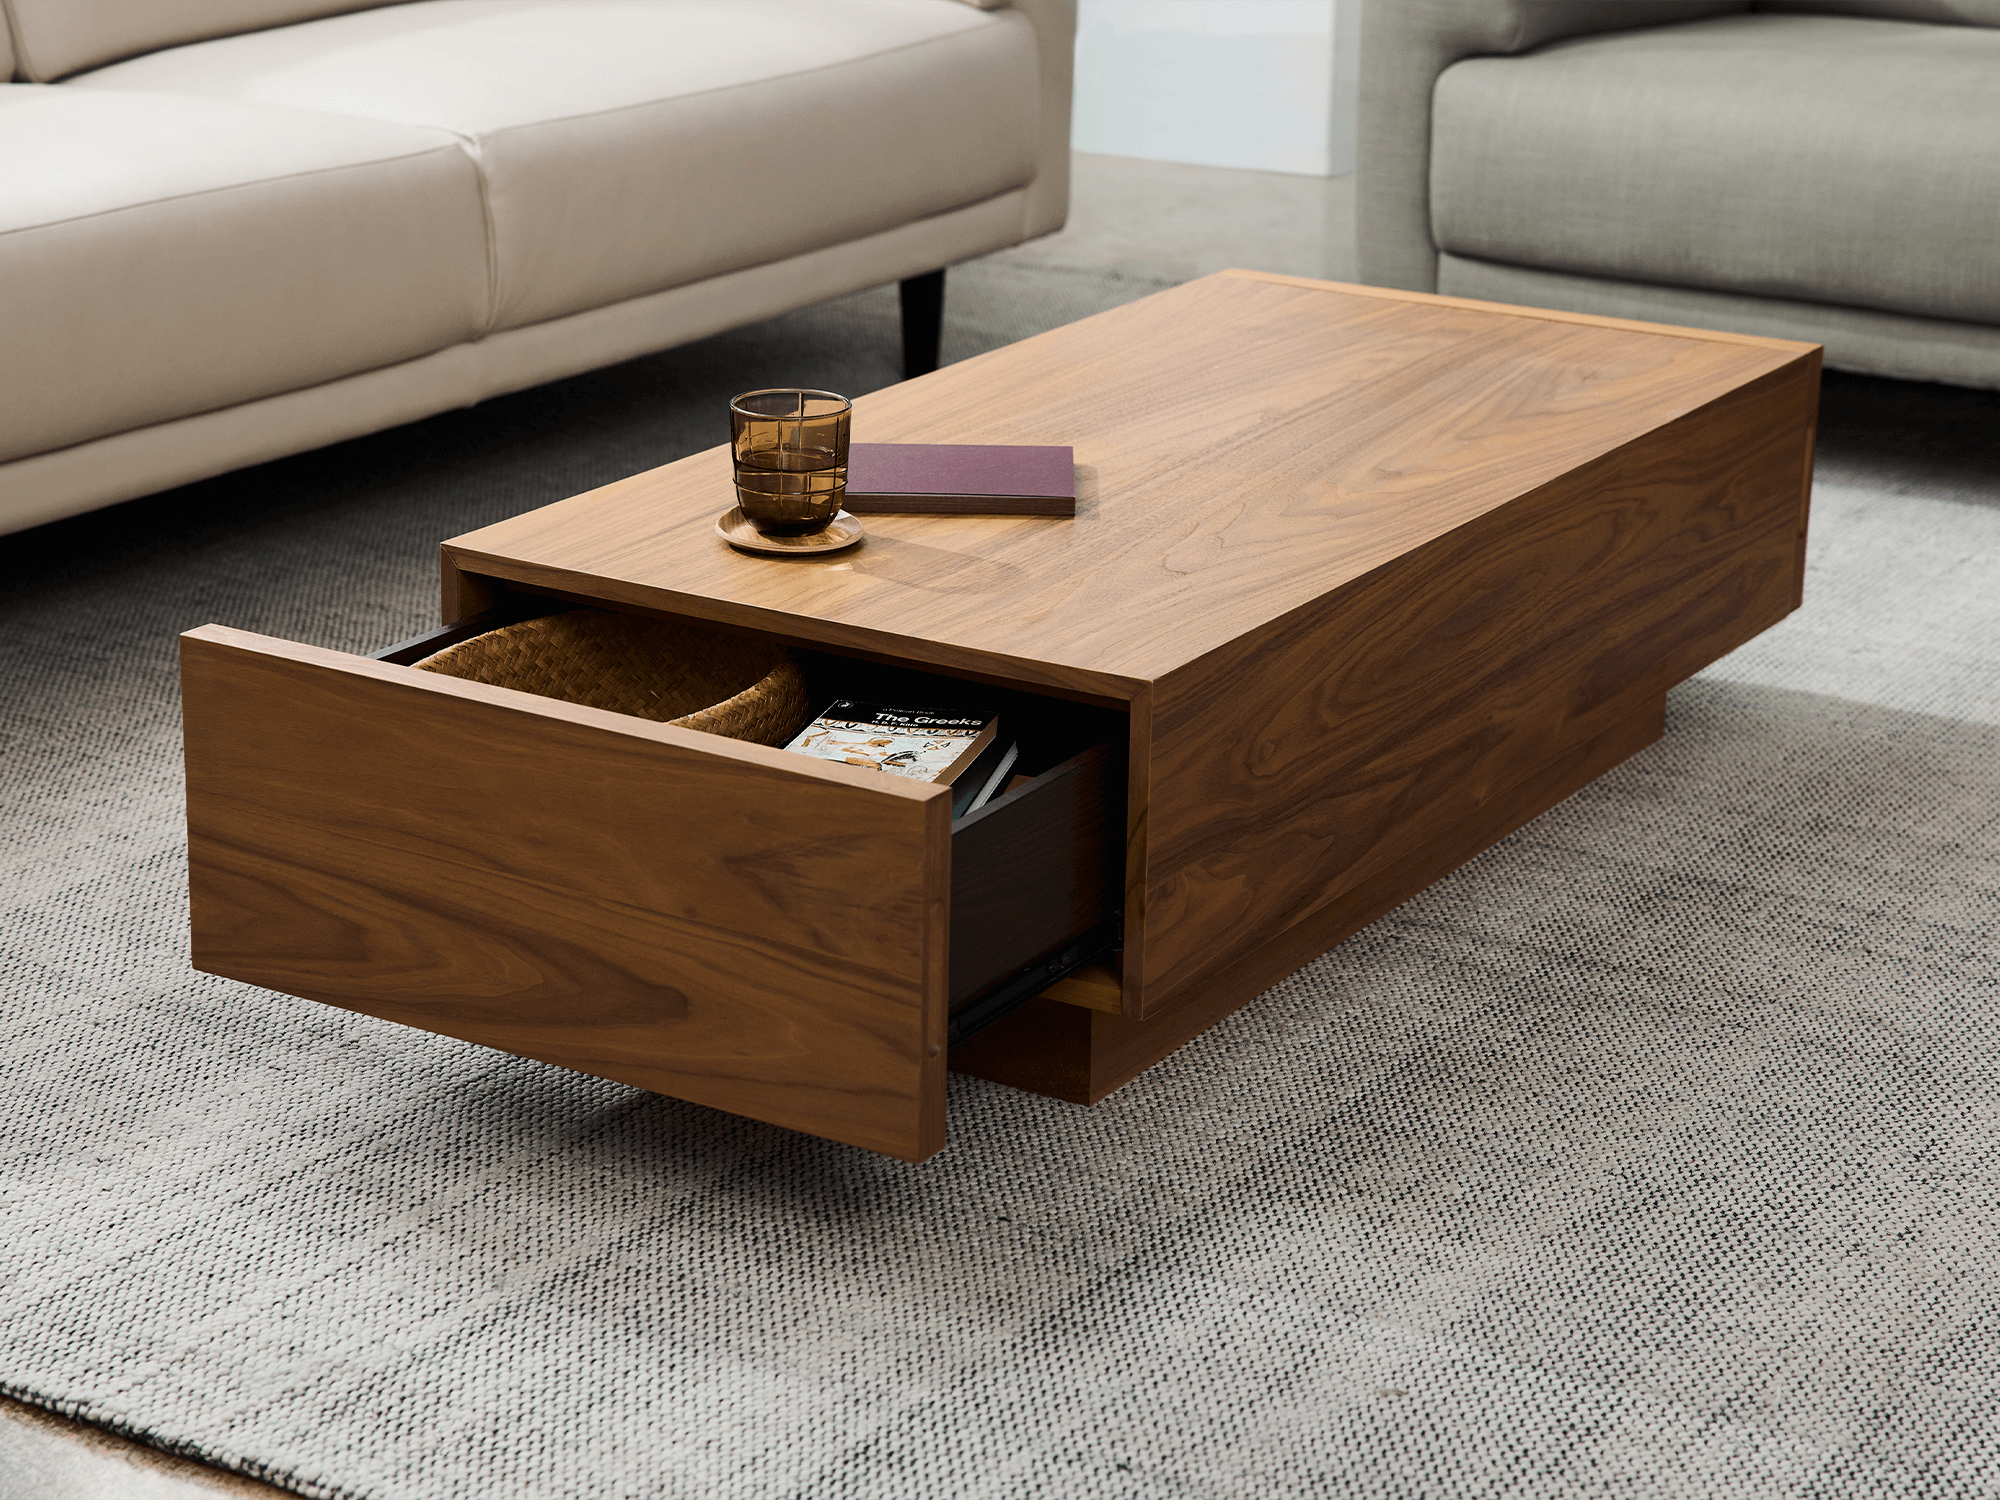 Boom Coffee Table | Modern Square Coffee Table With Storage Intended For Coffee Tables With Storage (View 5 of 15)